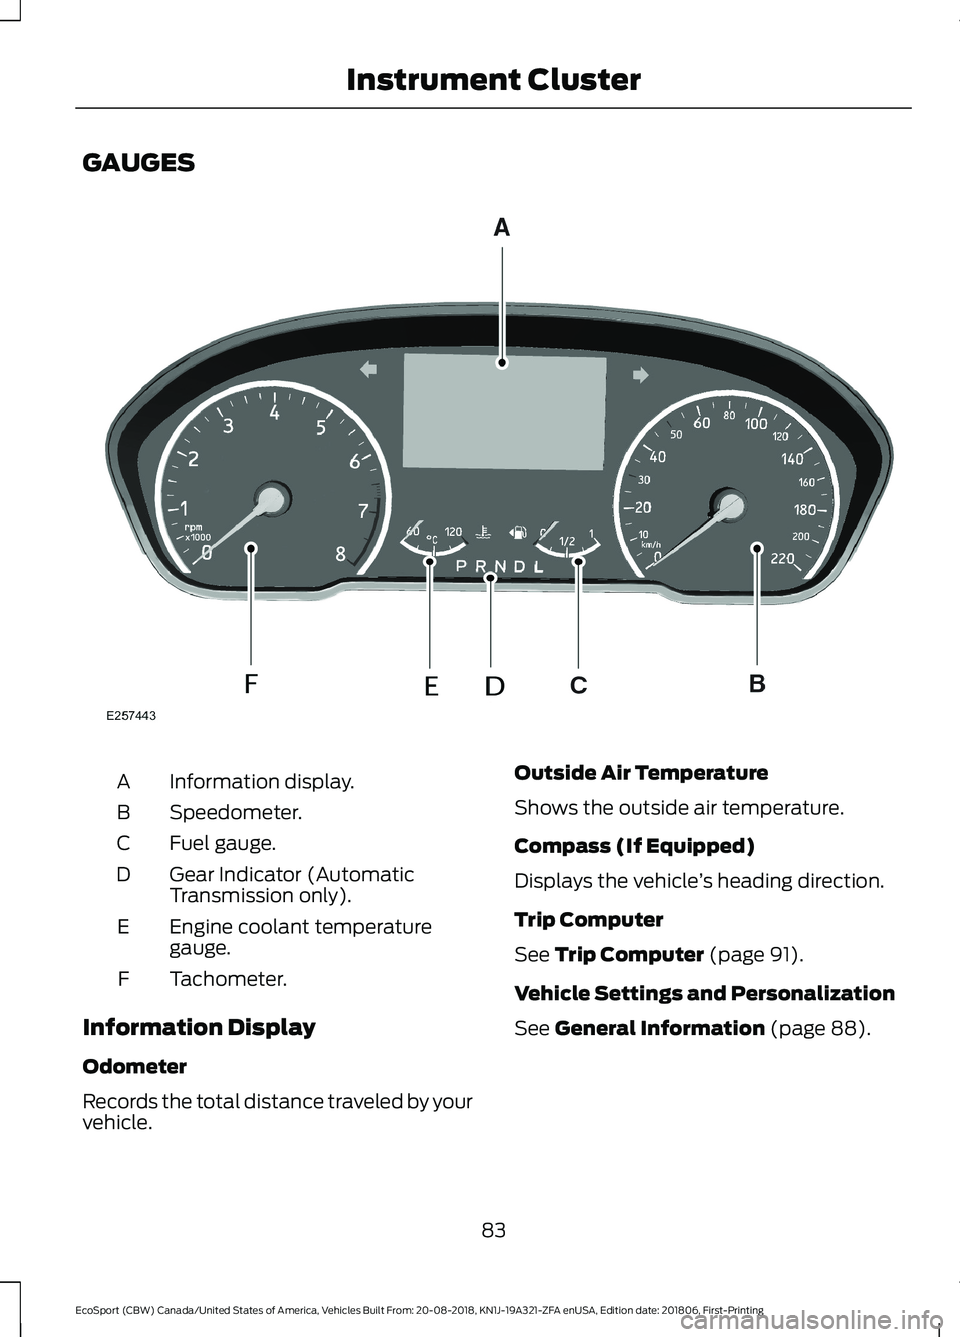 FORD ECOSPORT 2019 User Guide GAUGES
Information display.A
Speedometer.B
Fuel gauge.C
Gear Indicator (AutomaticTransmission only).D
Engine coolant temperaturegauge.E
Tachometer.F
Information Display
Odometer
Records the total dist